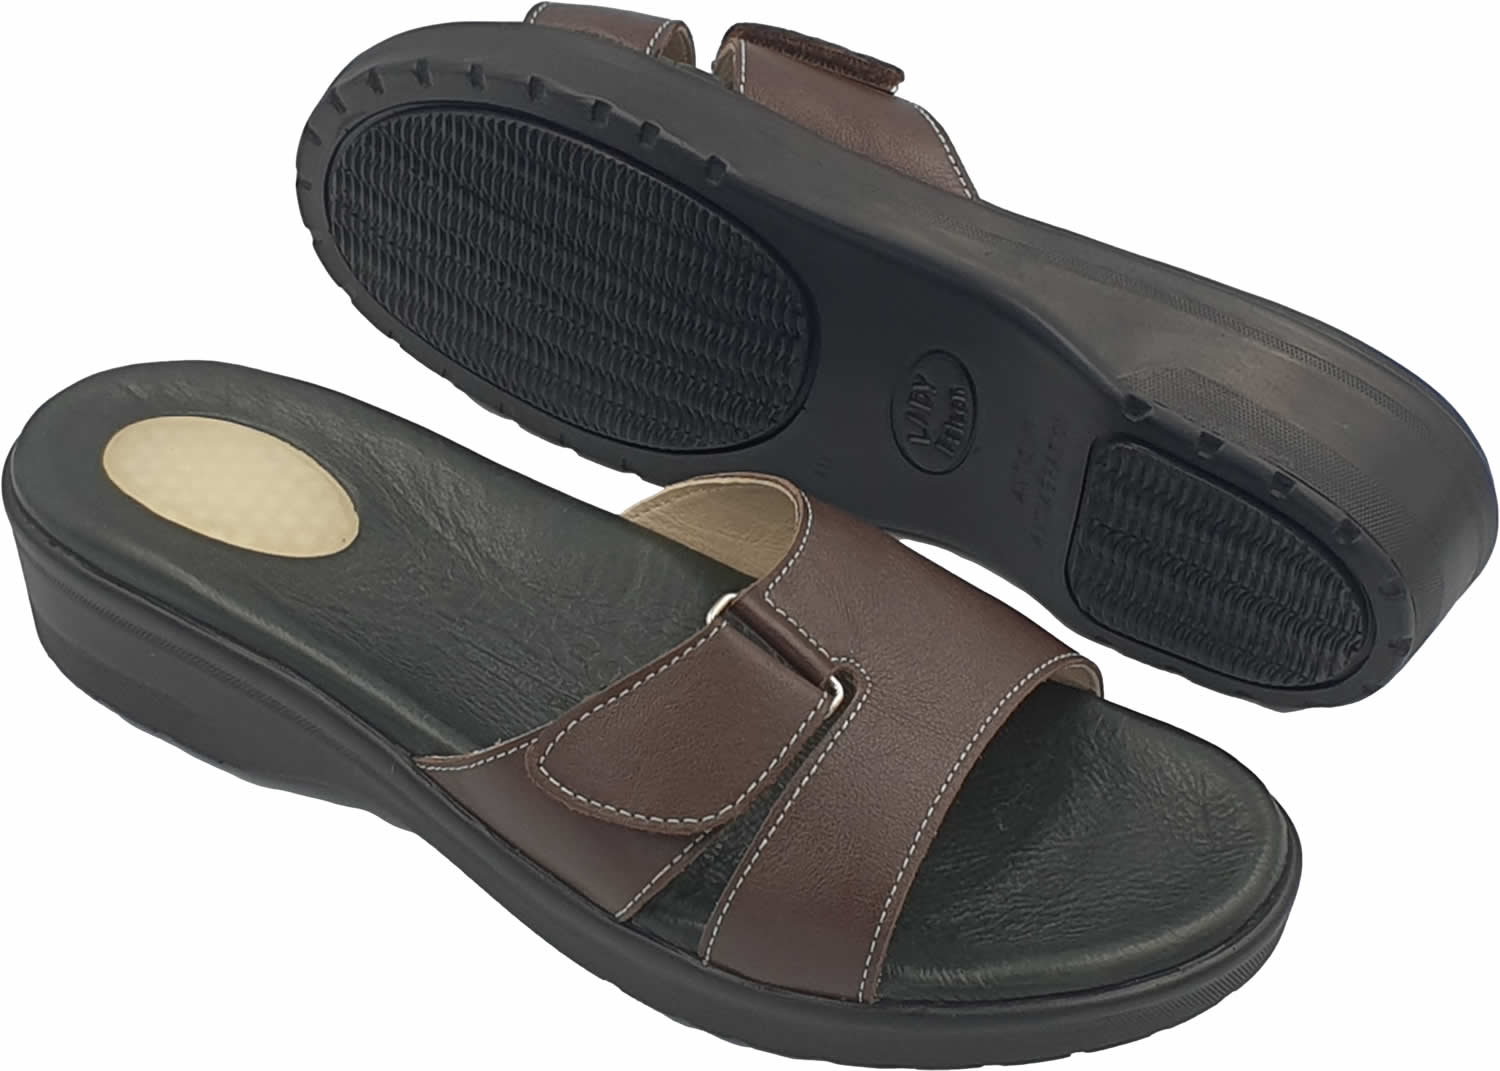 Orthotic Slippers with arch support - Footlogics